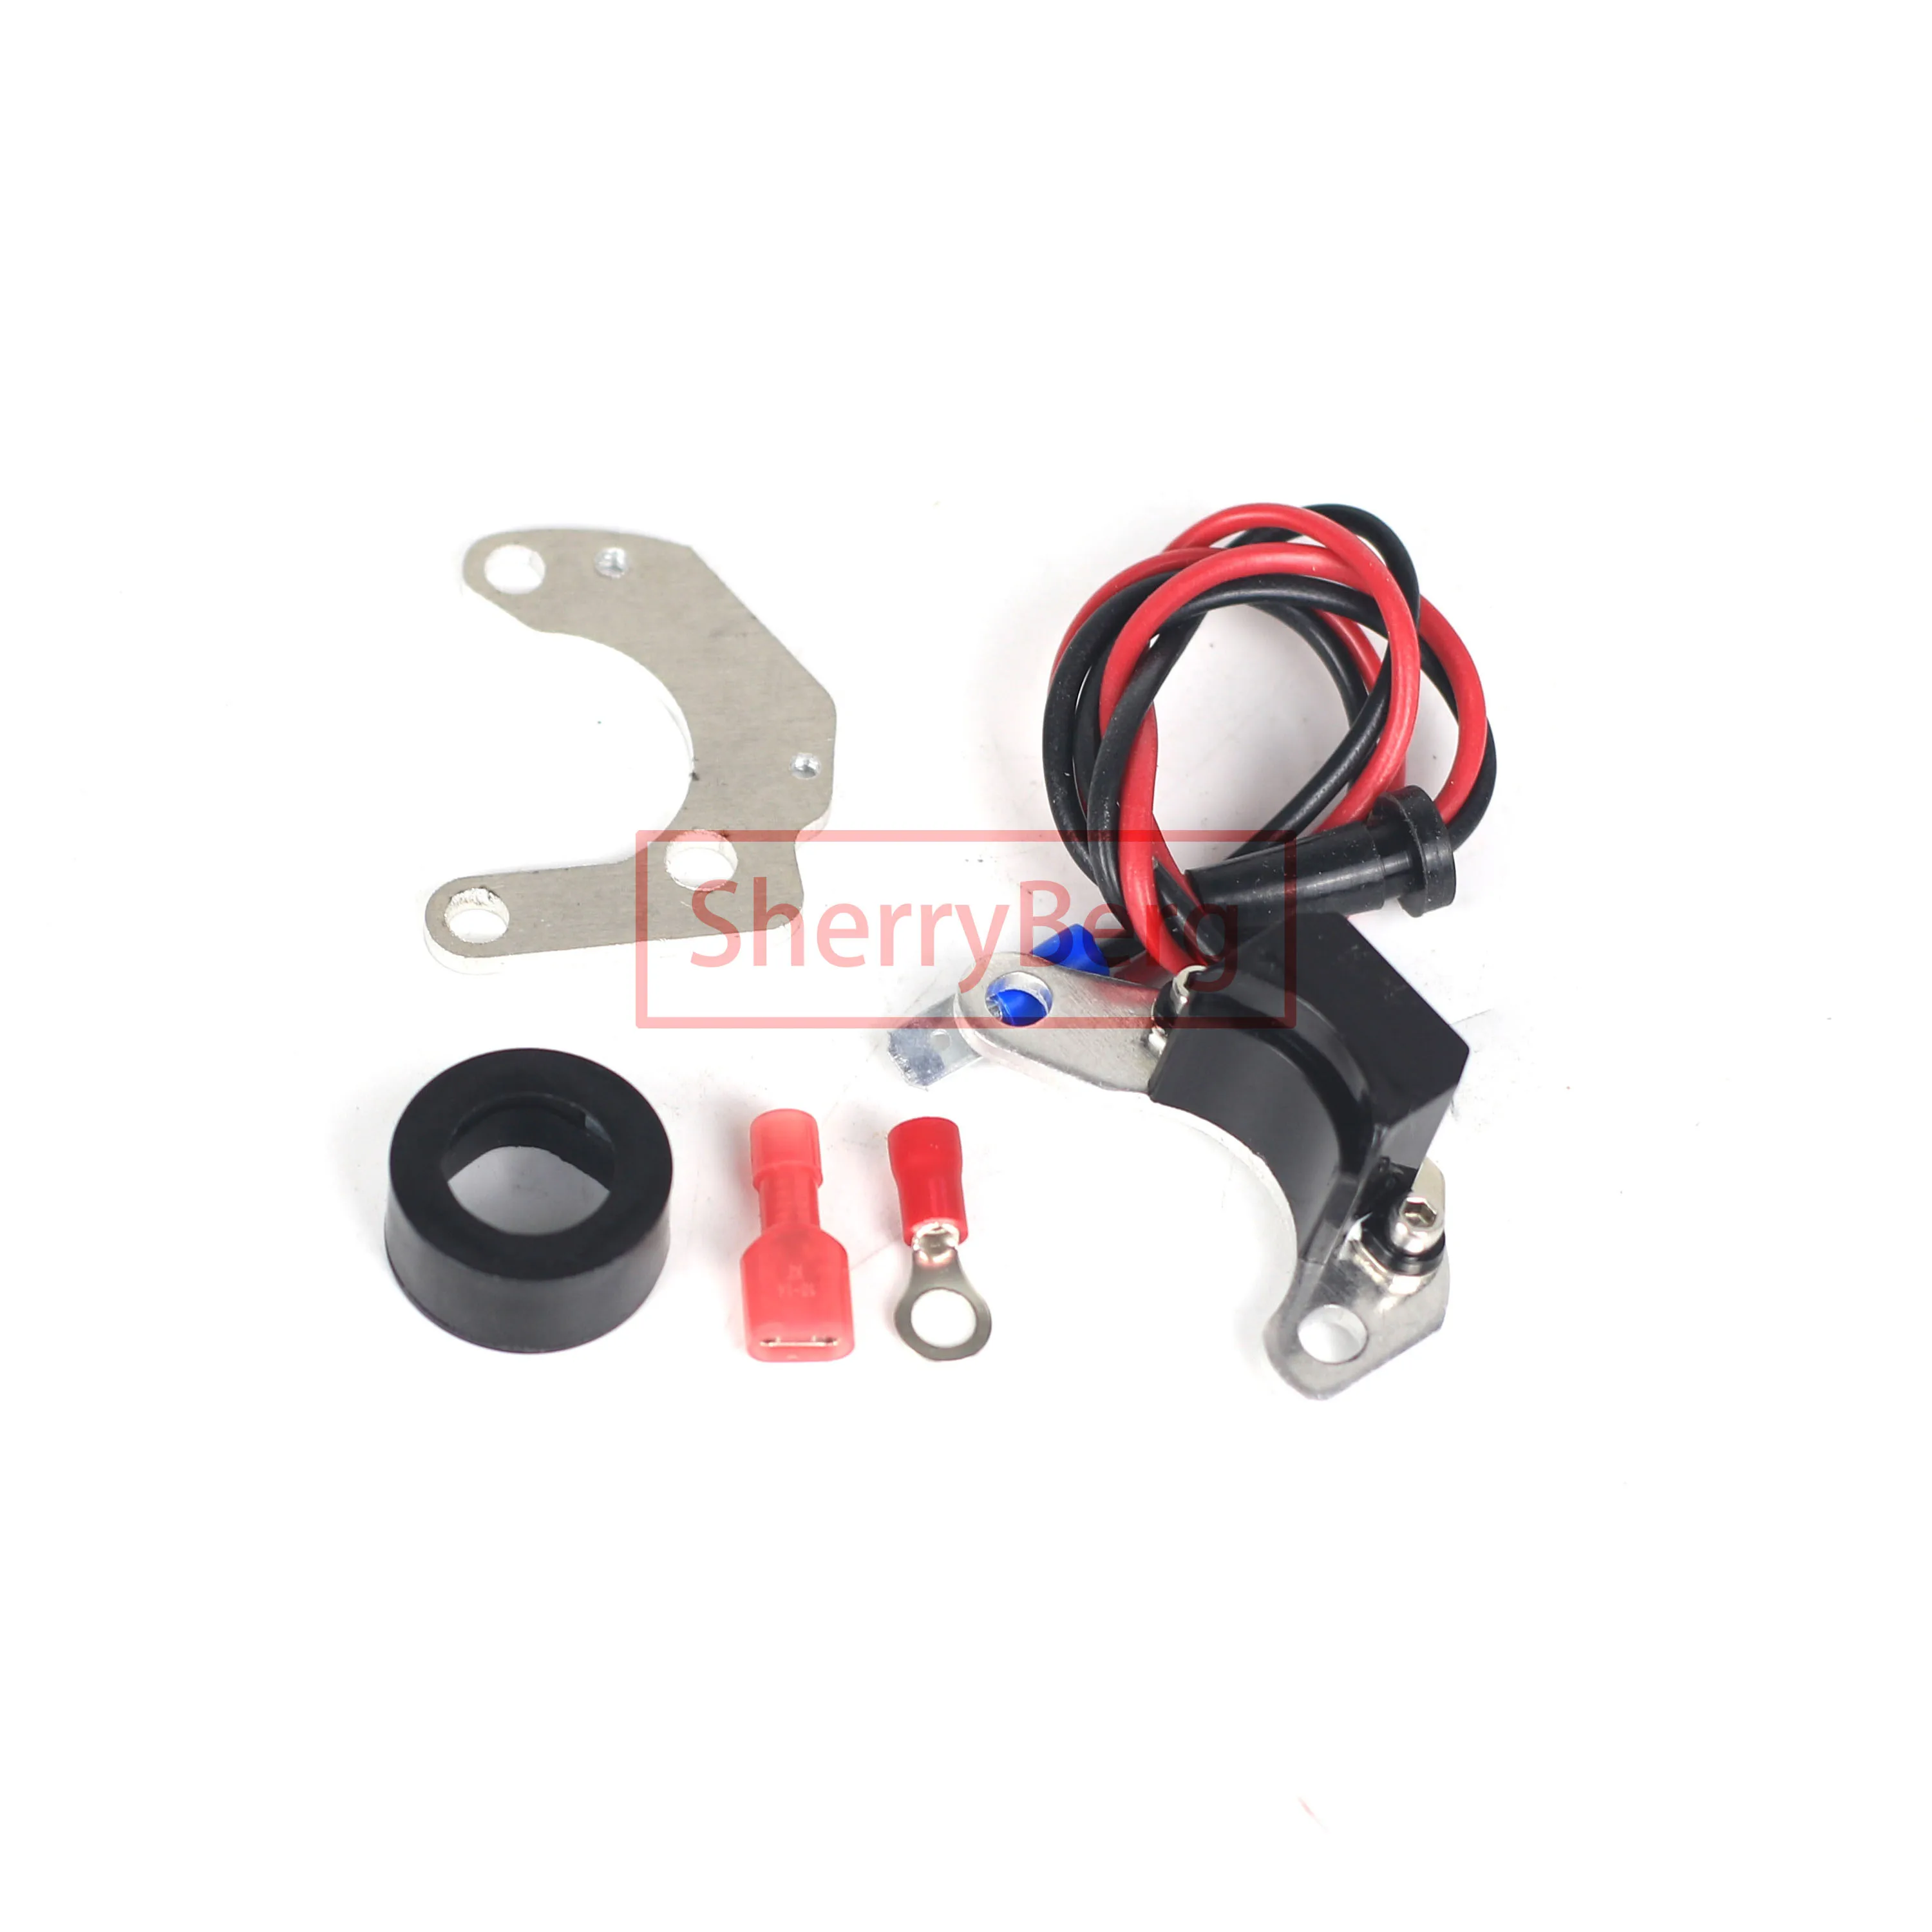 

SherryBerg New Distributor Electronic Ignition Kit for Lucas 45D 43D & 59D Distributor Positive Earth Extra Aluminum plate